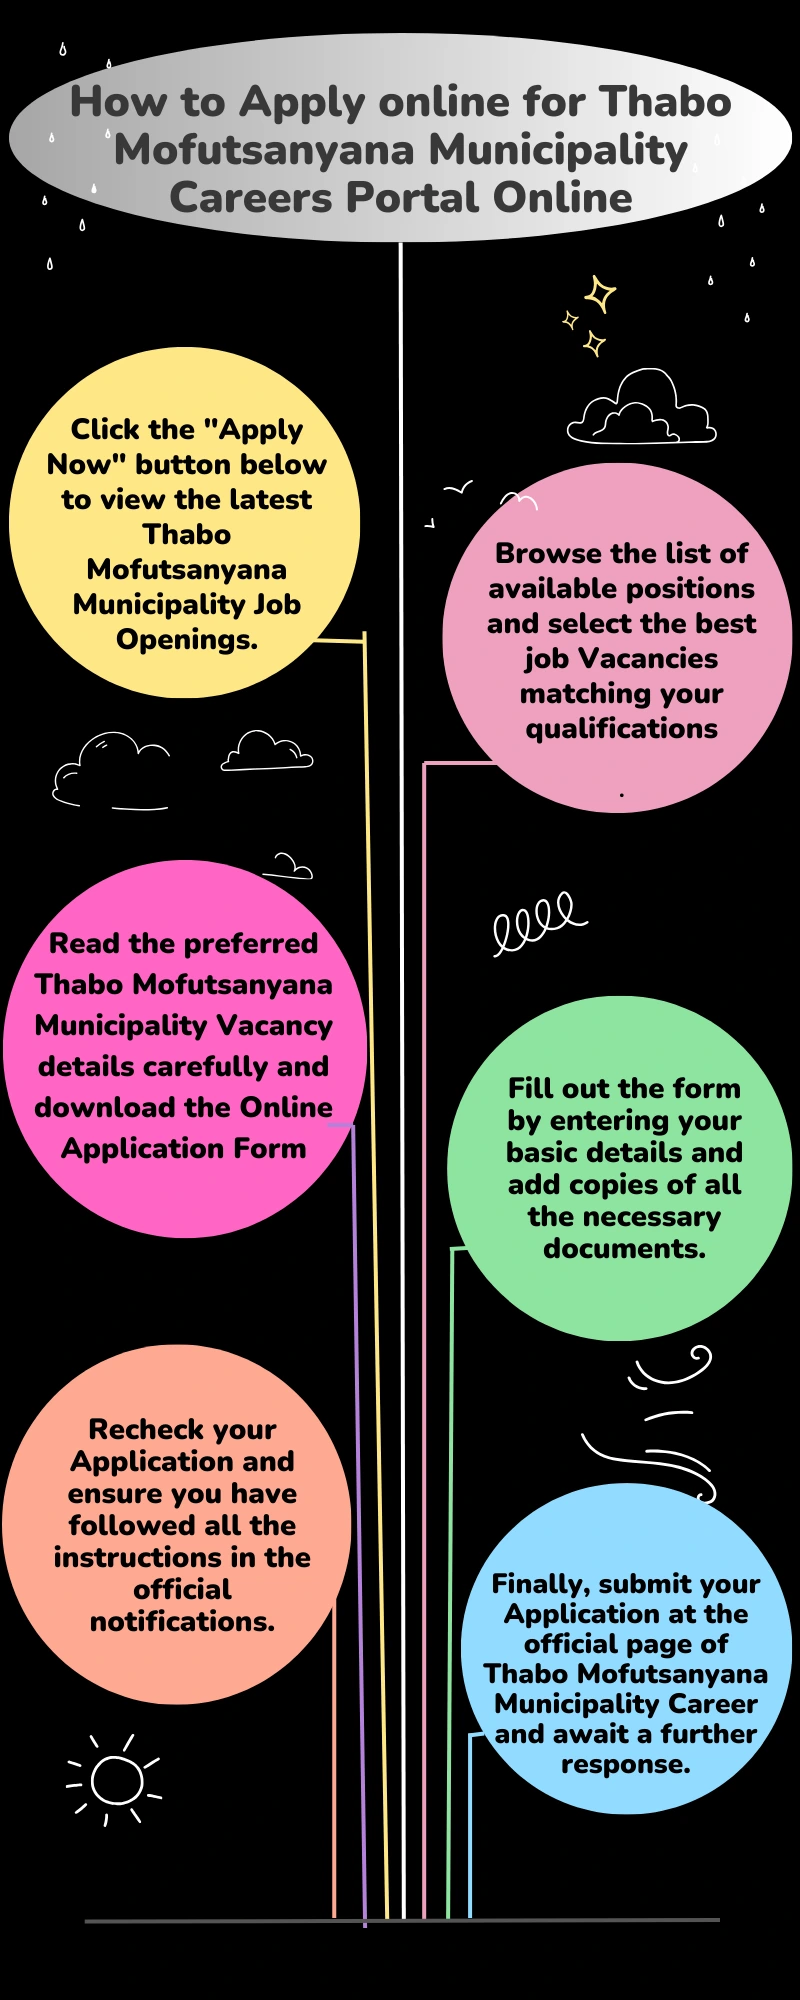 How to Apply online for Thabo Mofutsanyana Municipality Careers Portal Online